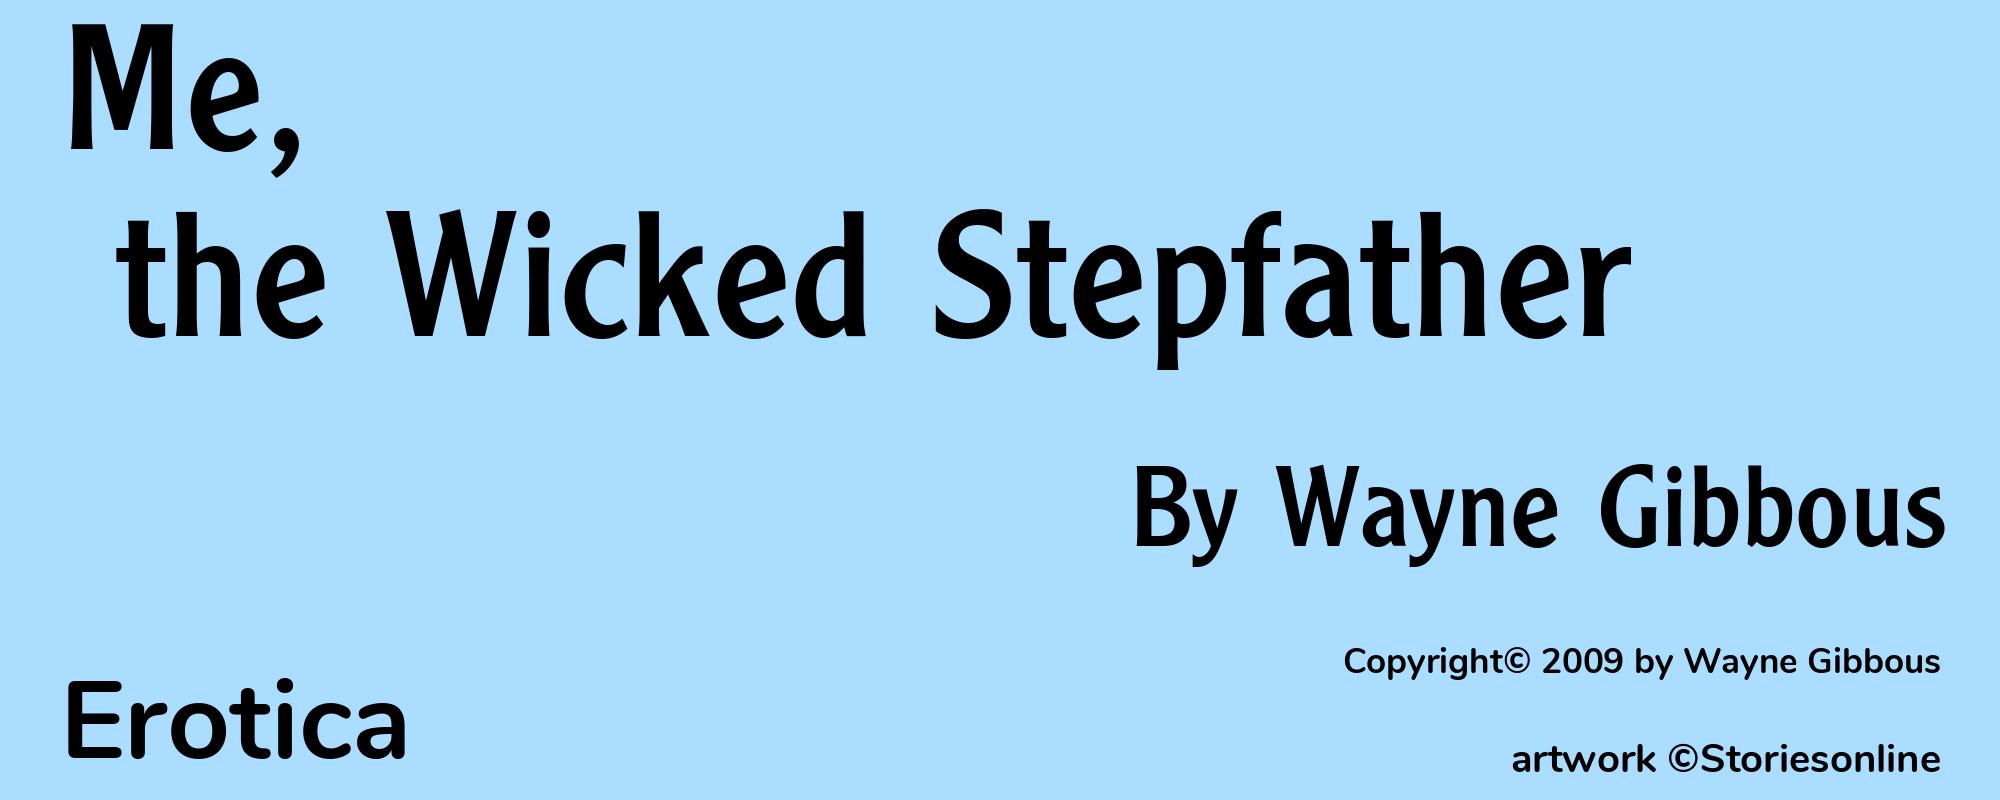 Me, the Wicked Stepfather - Cover